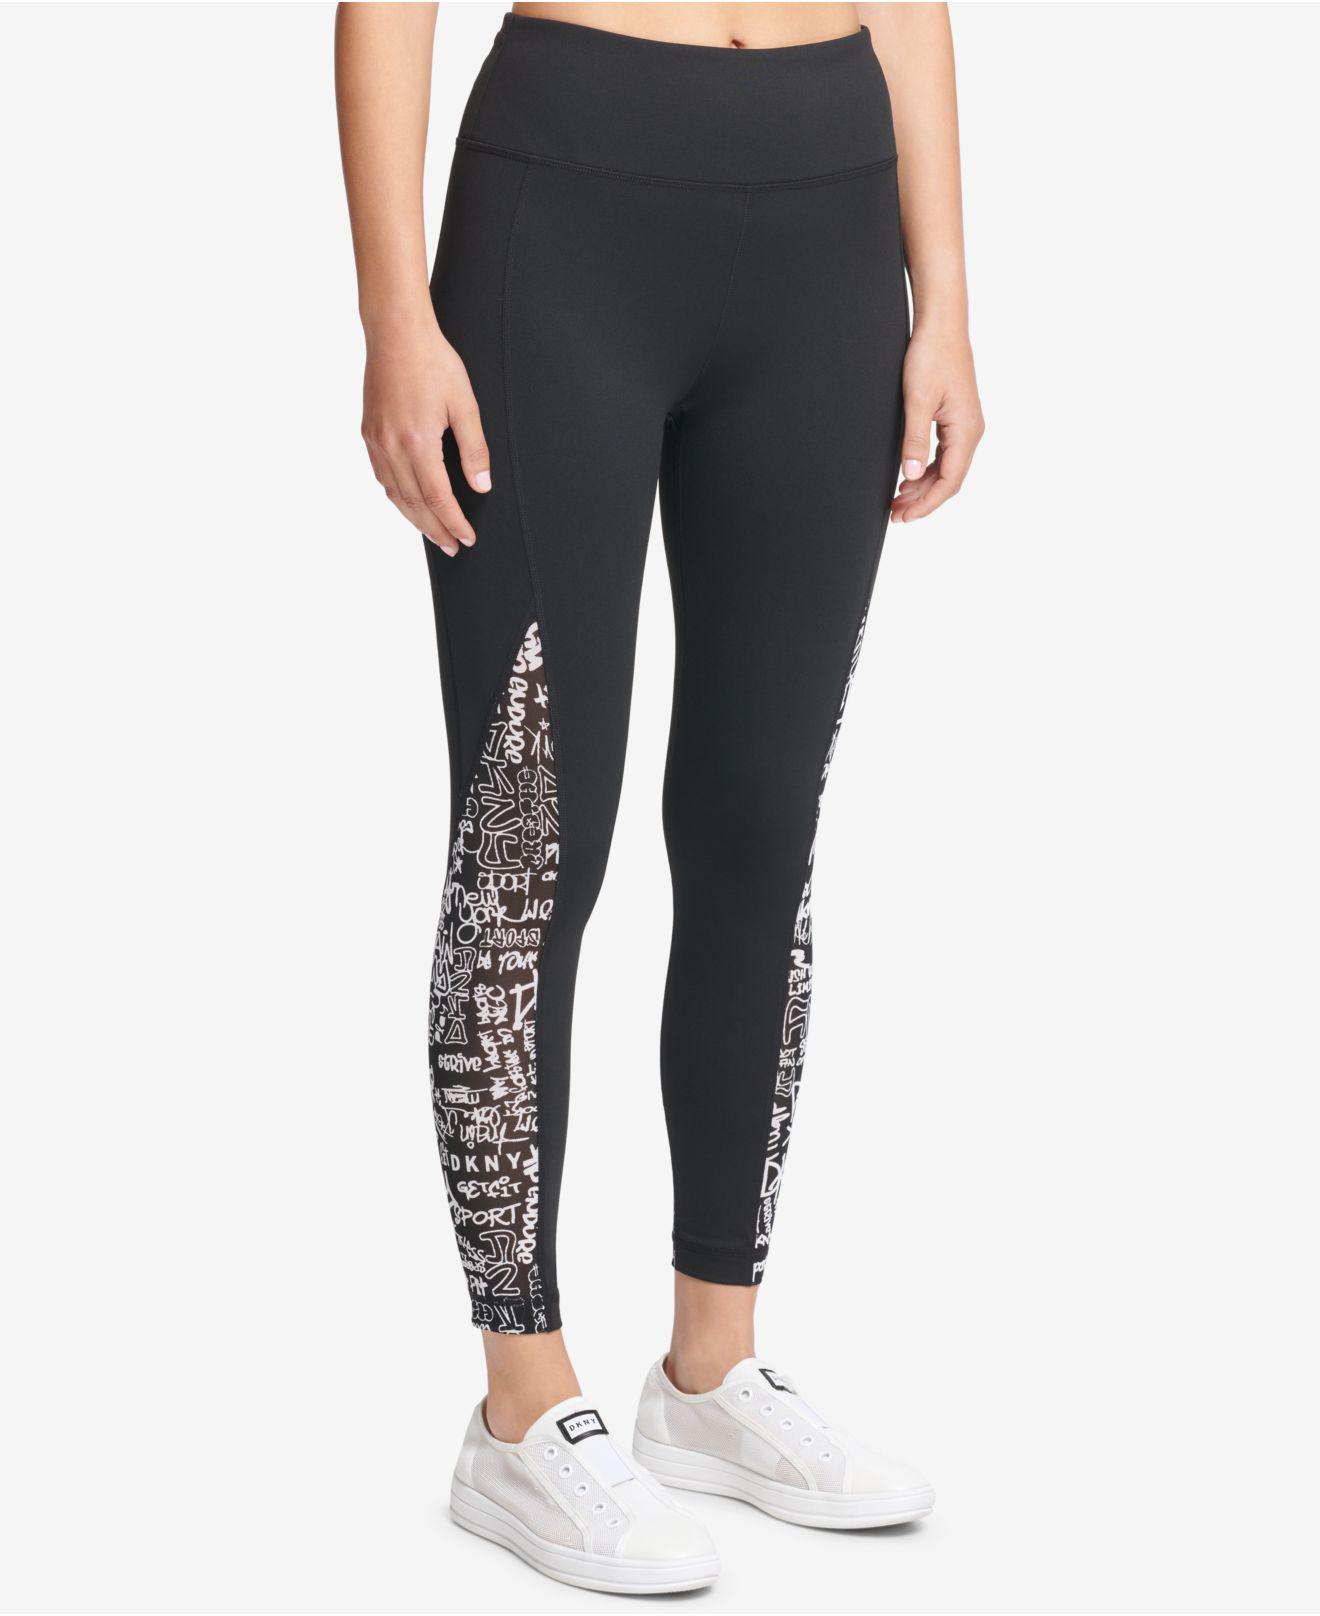 Dkny Sport Leggings Tk Maxxis Tires  International Society of Precision  Agriculture